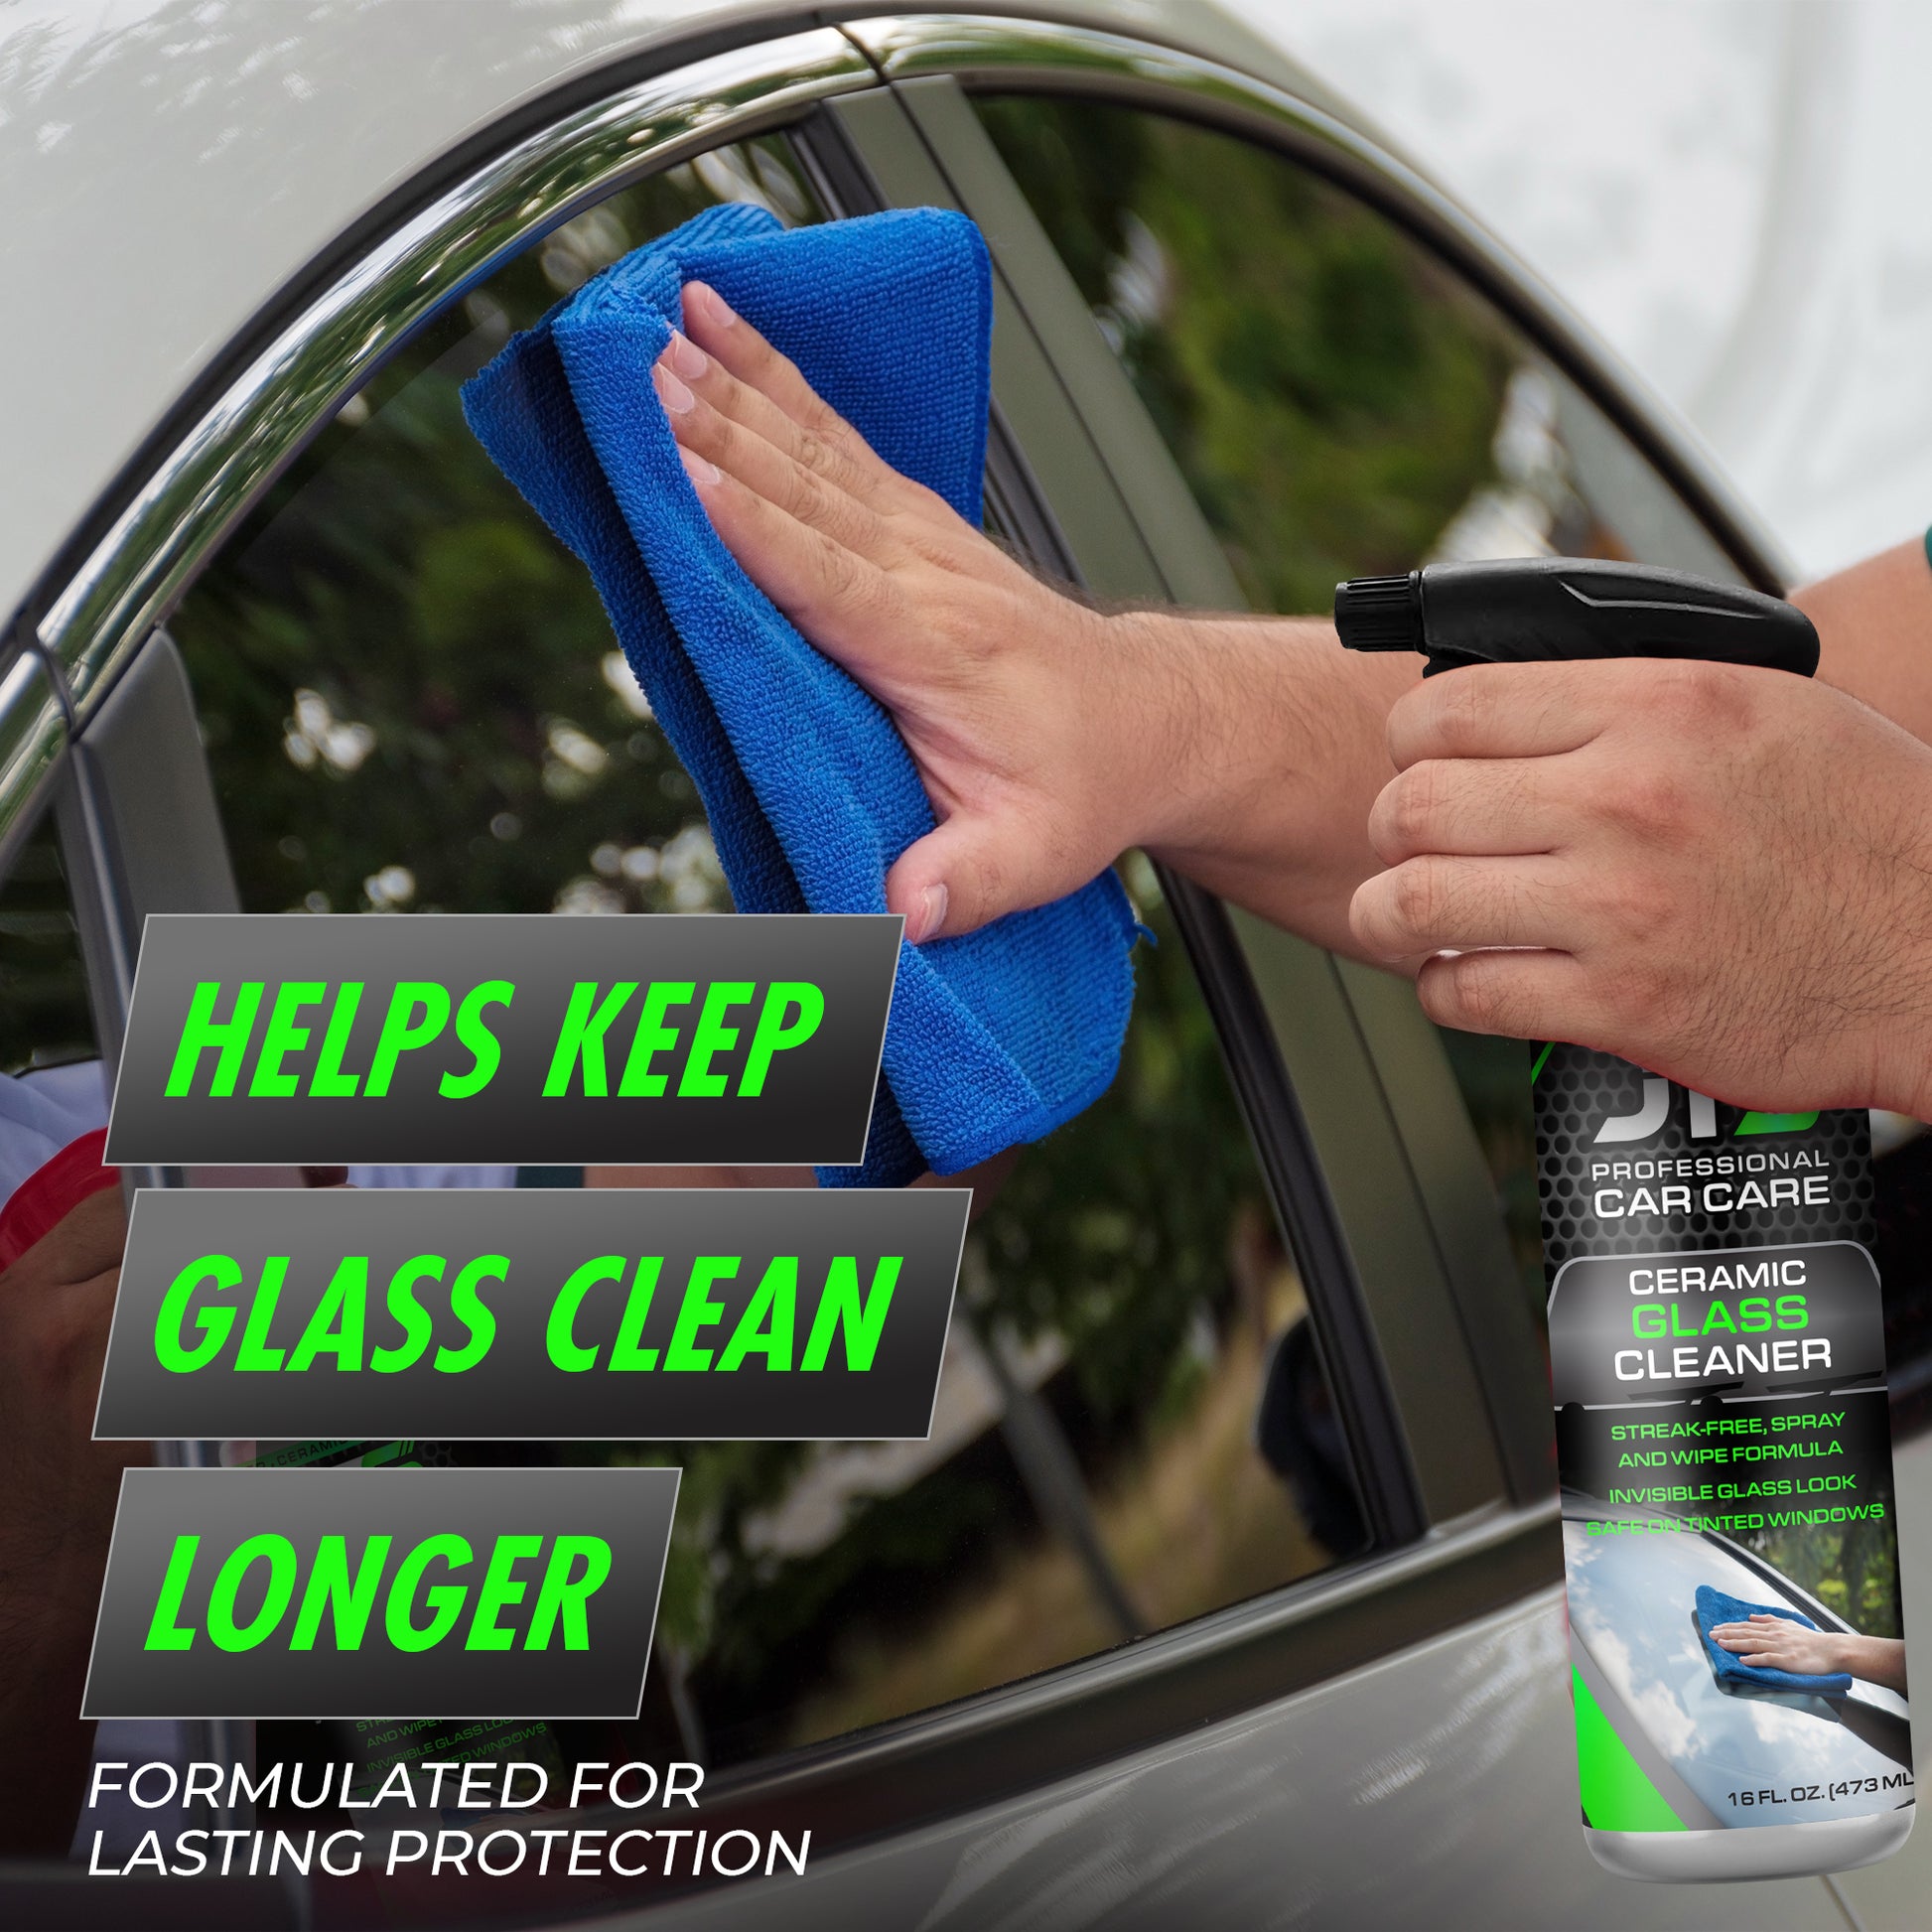 Can you use regular glass cleaner on car window?